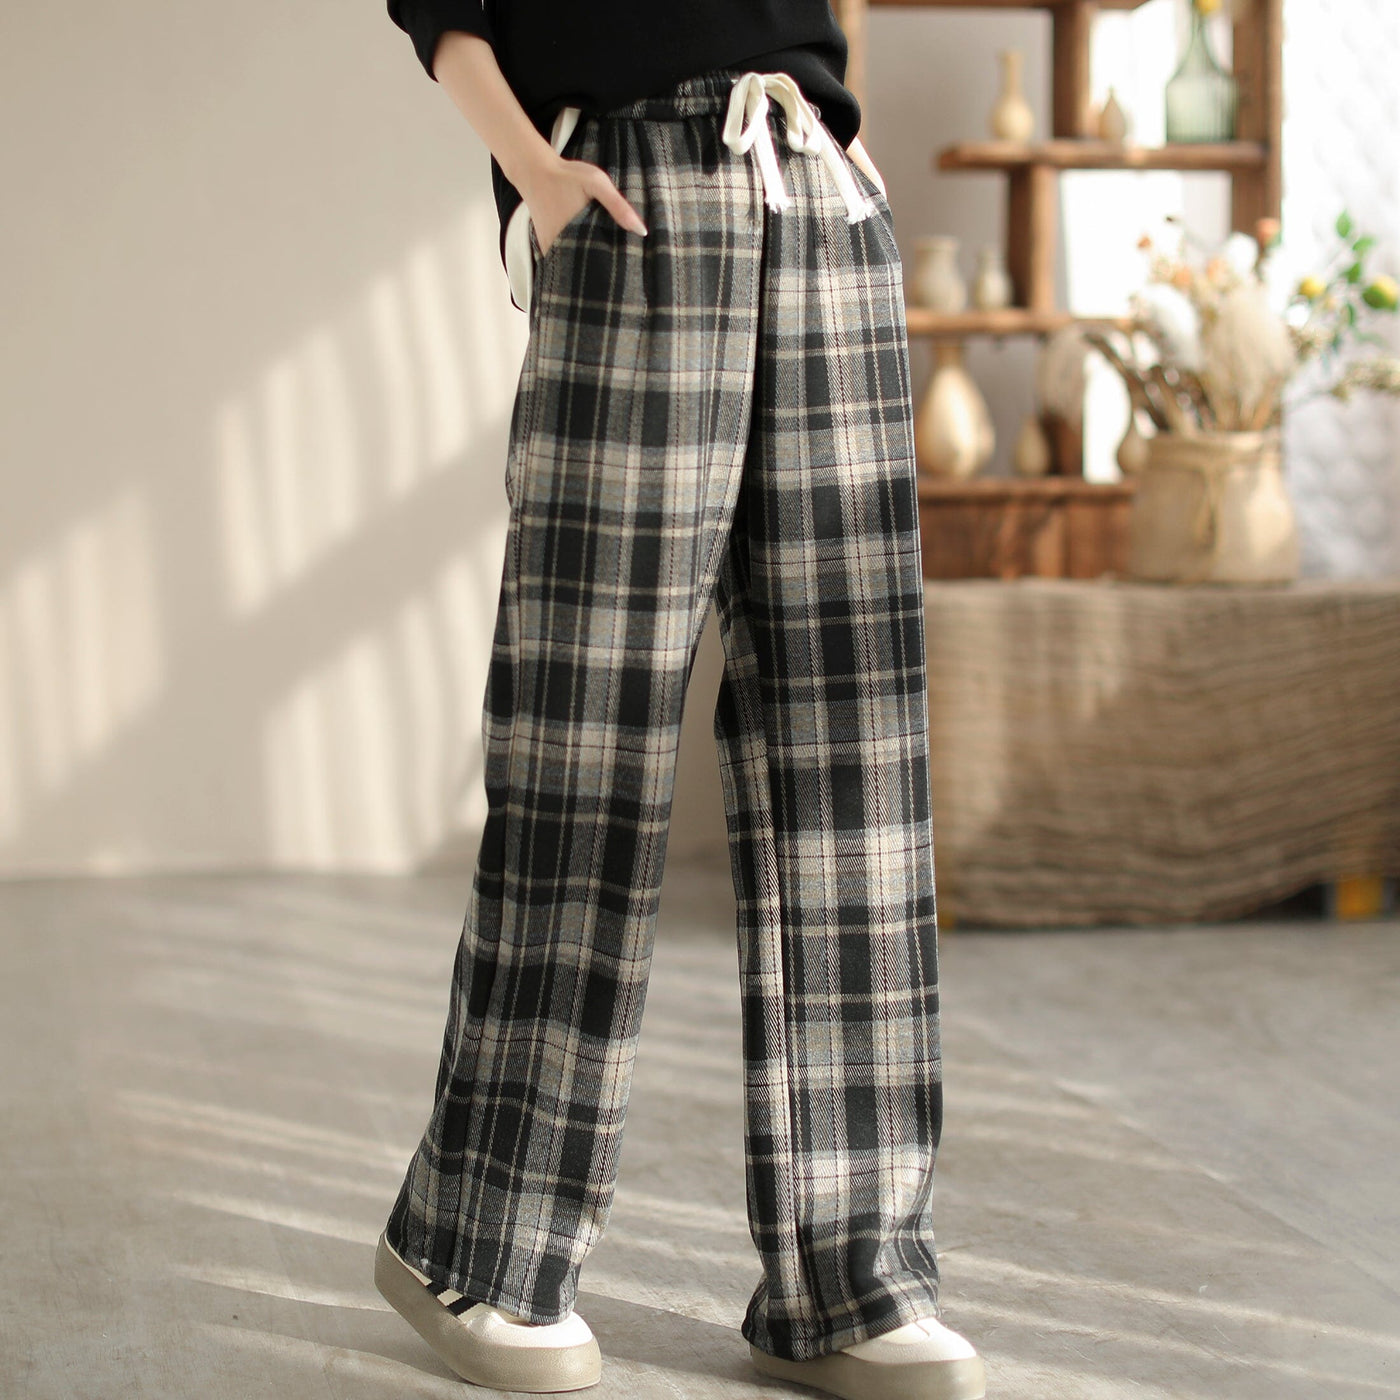 Winter Casual Plaid Cotton Furred Loose Pants